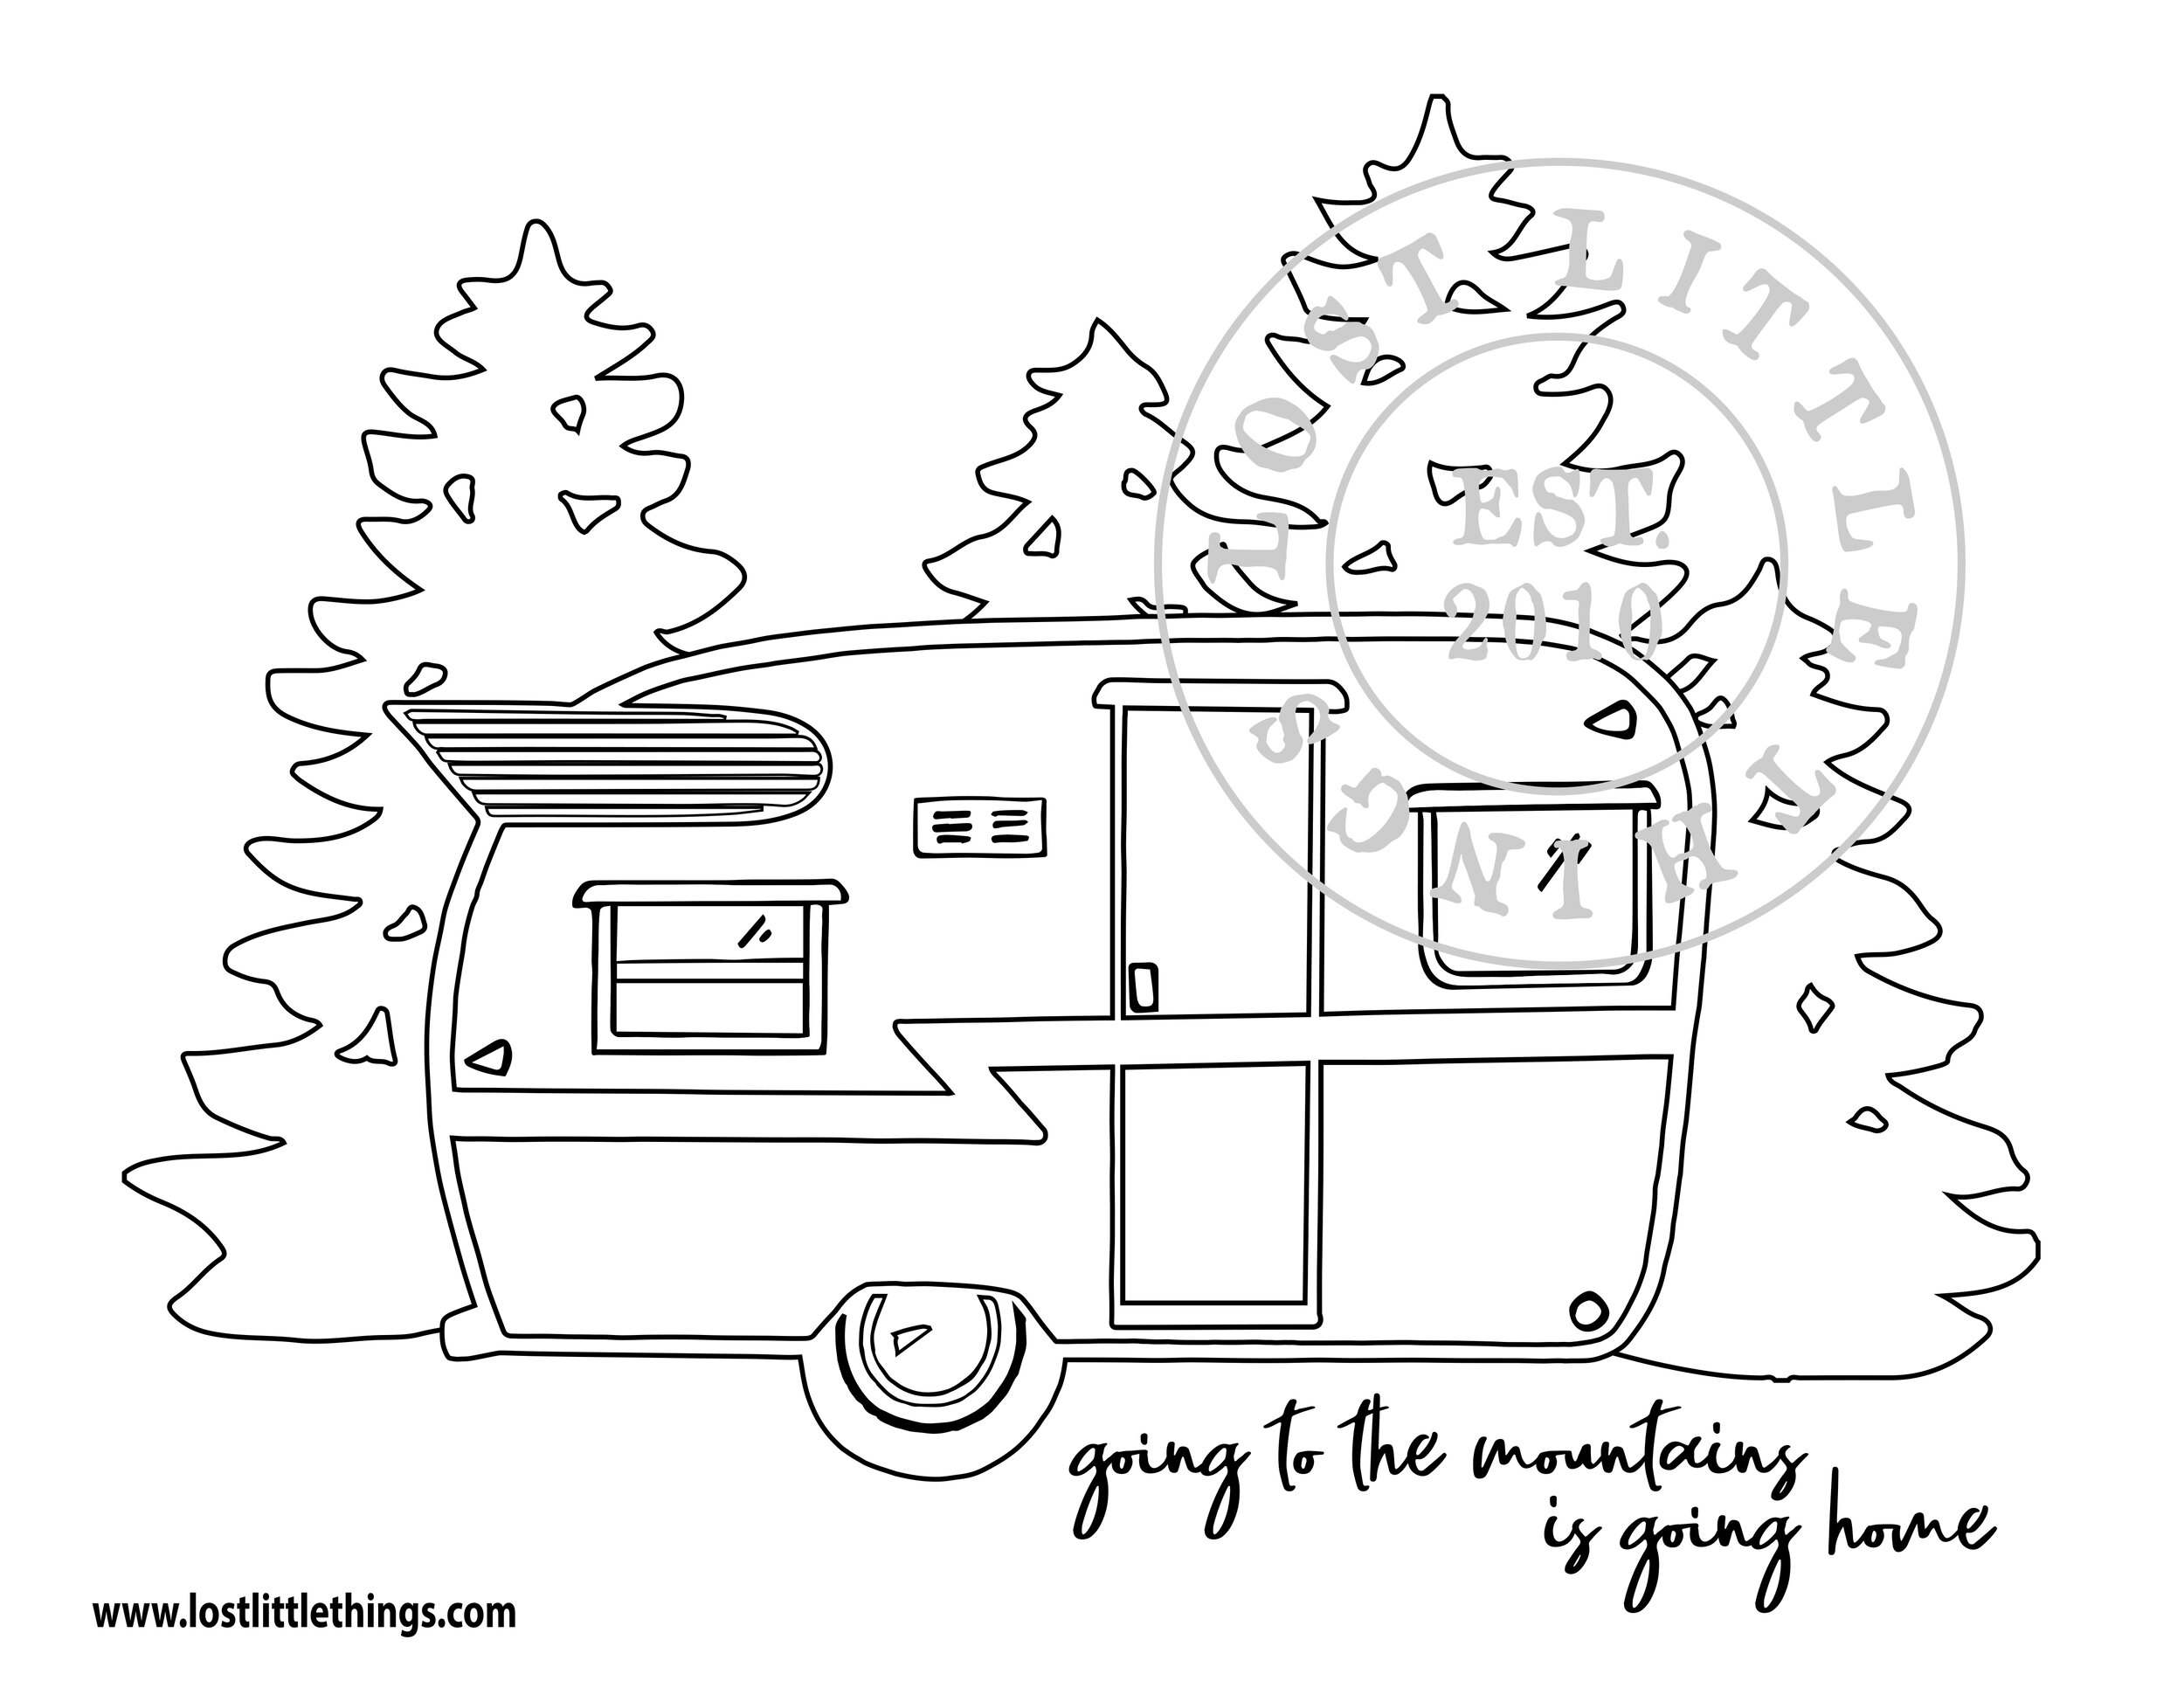 Free coloring pages â lost little things